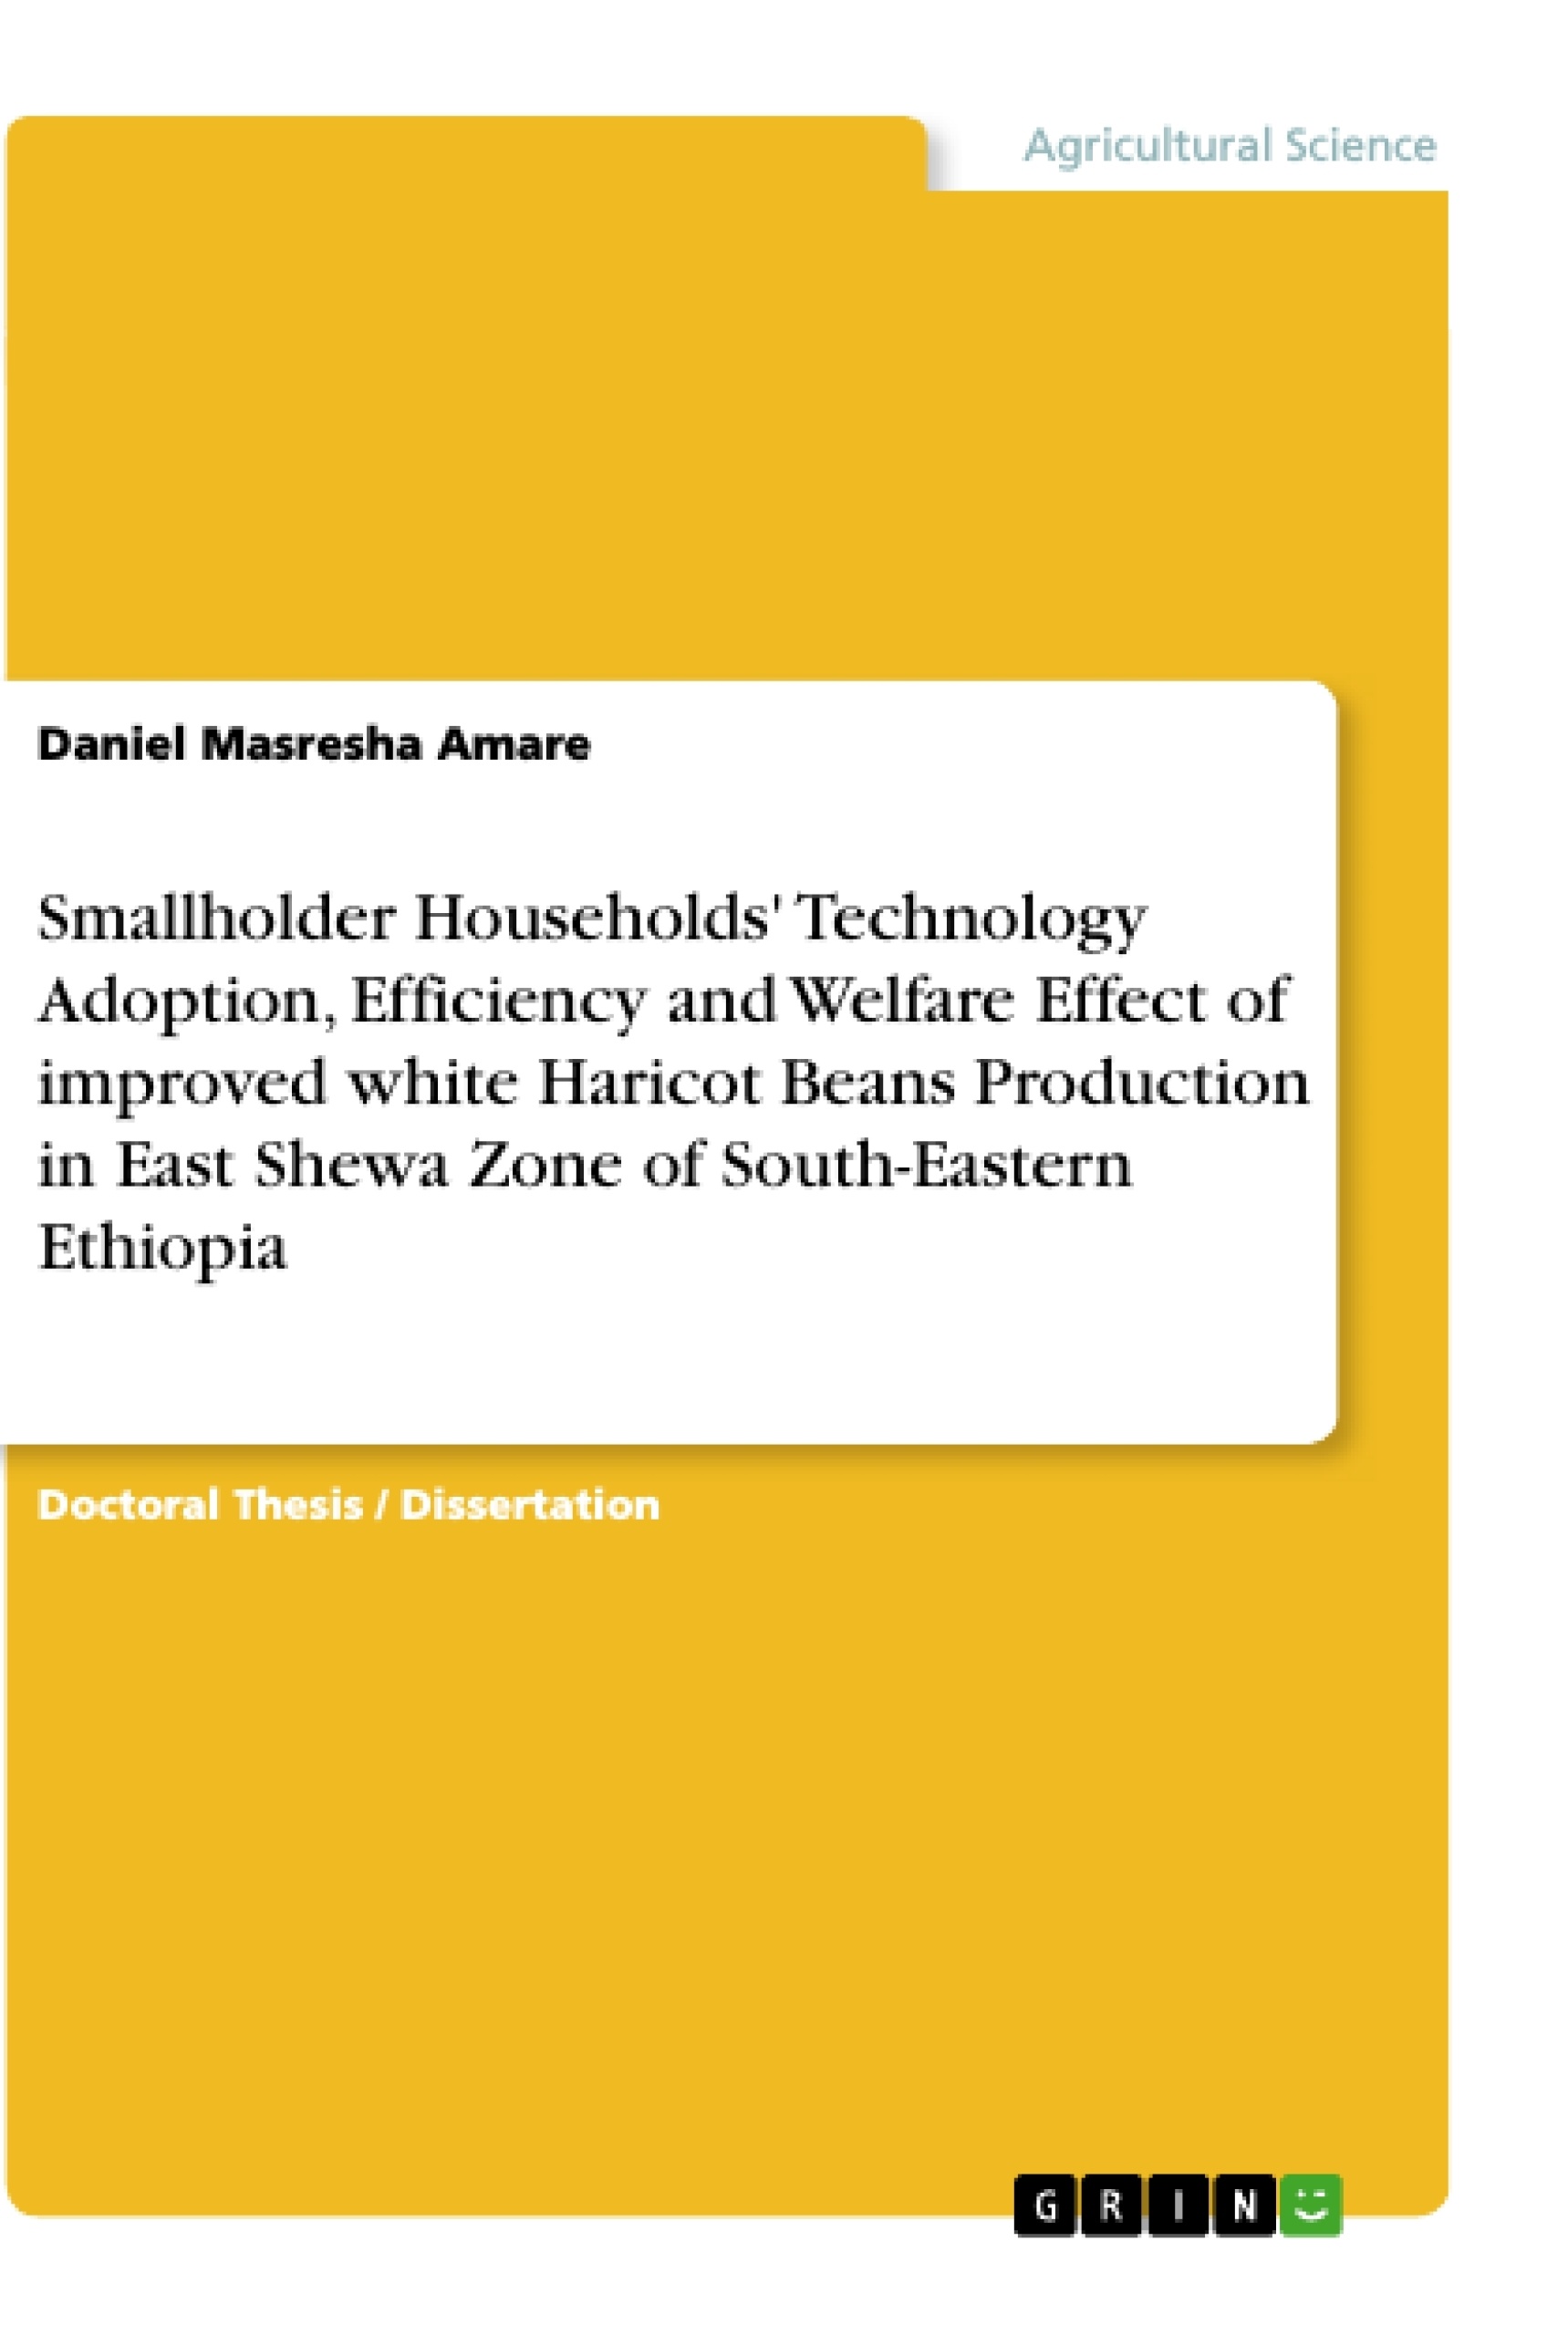 Title: Smallholder Households' Technology Adoption, Efficiency and Welfare Effect of improved white Haricot Beans Production in East Shewa Zone of South-Eastern Ethiopia